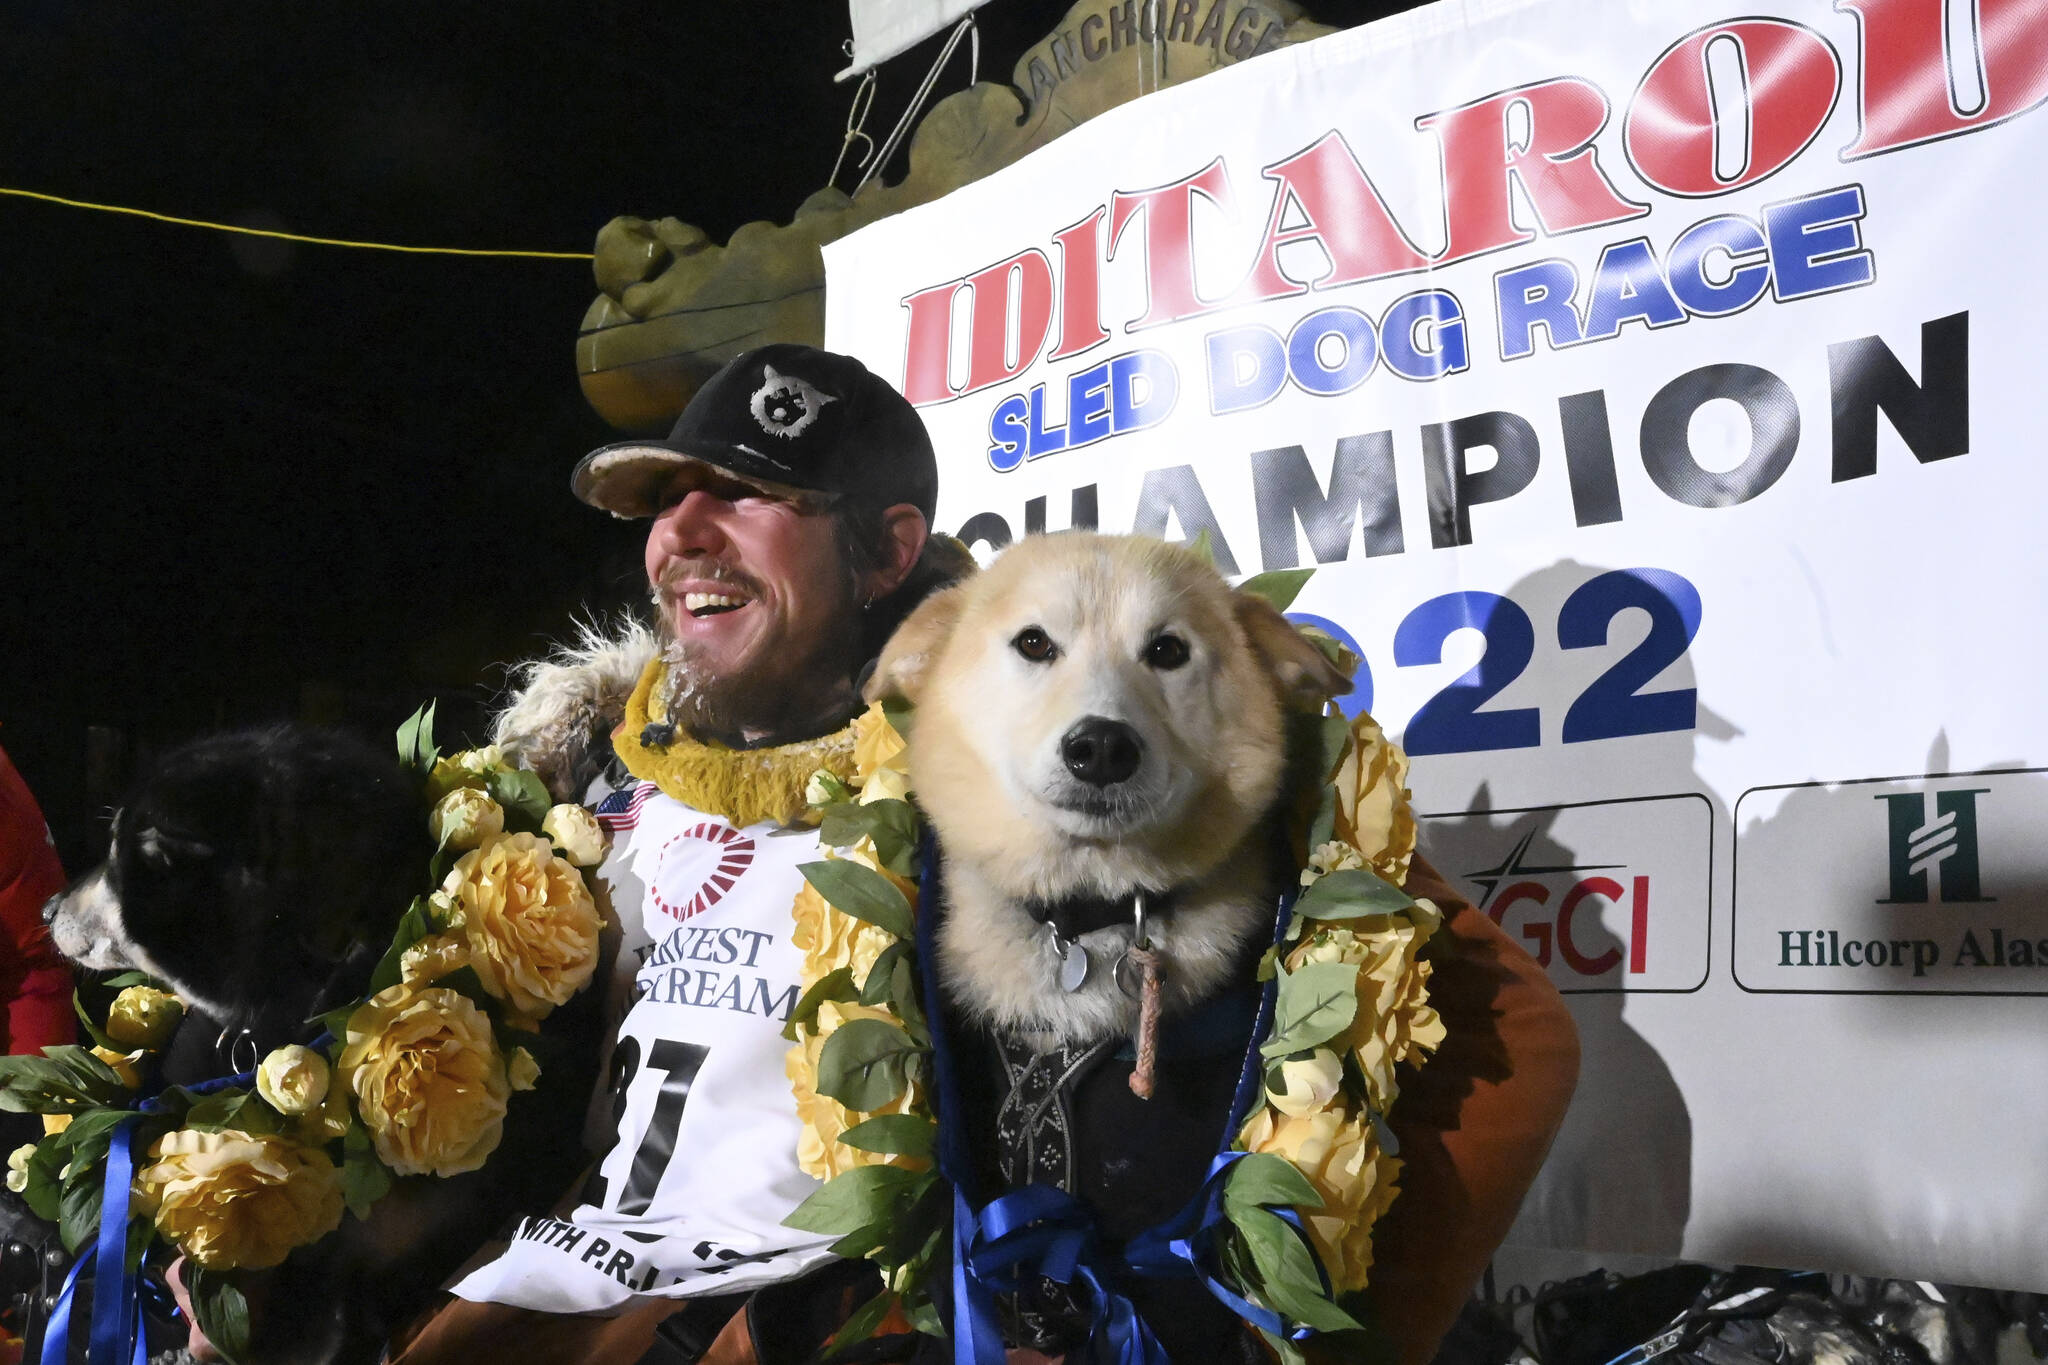 Iditarod winner Brent Sass poses for photos with lead dogs Morello, left, and Slater after winning the Iditarod Trail Sled Dog Race in Nome, Alaska, March 15, 2022. A second musher has been disqualified from the world’s most famous sled dog race. The governing body of the Iditarod Trail Sled Dog Race said in a one-sentence statement late Thursday night, Feb. 22, 2024, that it has withdrawn 2022 champion Brent Sass just days before the start of this year’s race. (Anne Raup/Anchorage Daily News via AP)